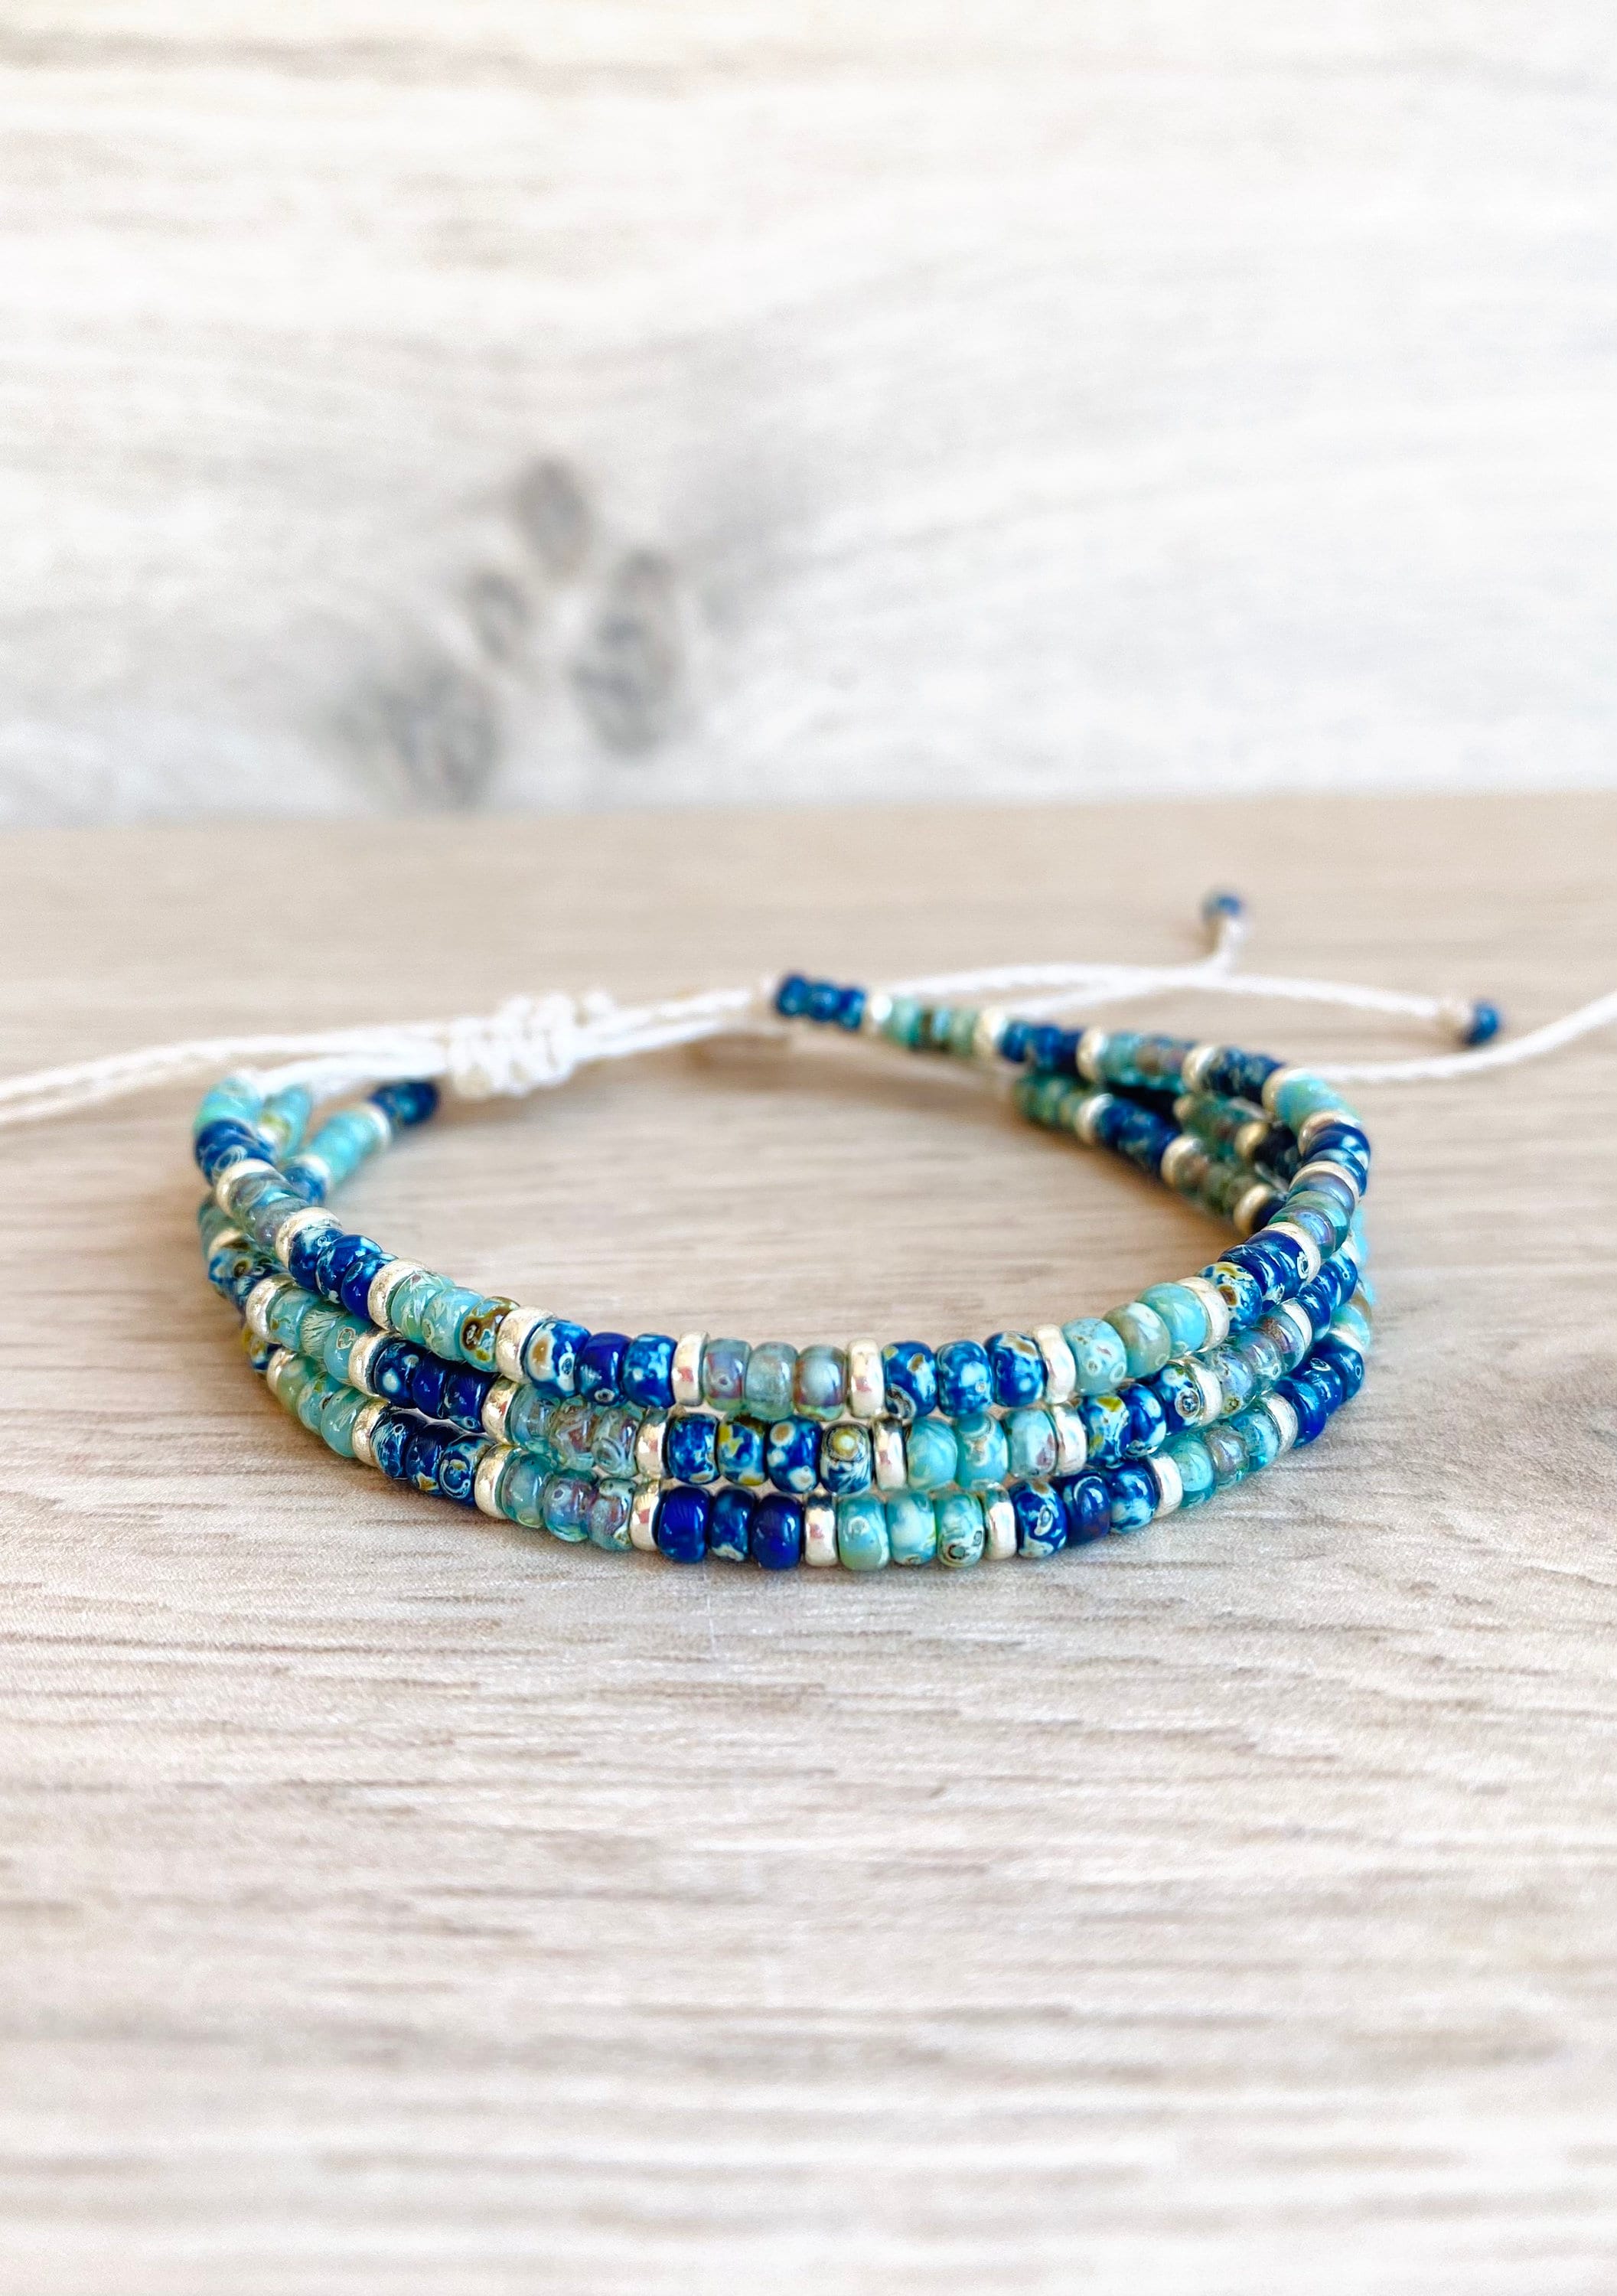 waterproof adjustable stackable jewelry waxed cord summer gift women 1 beaded boho bracelet with turquoise and blue seed beads